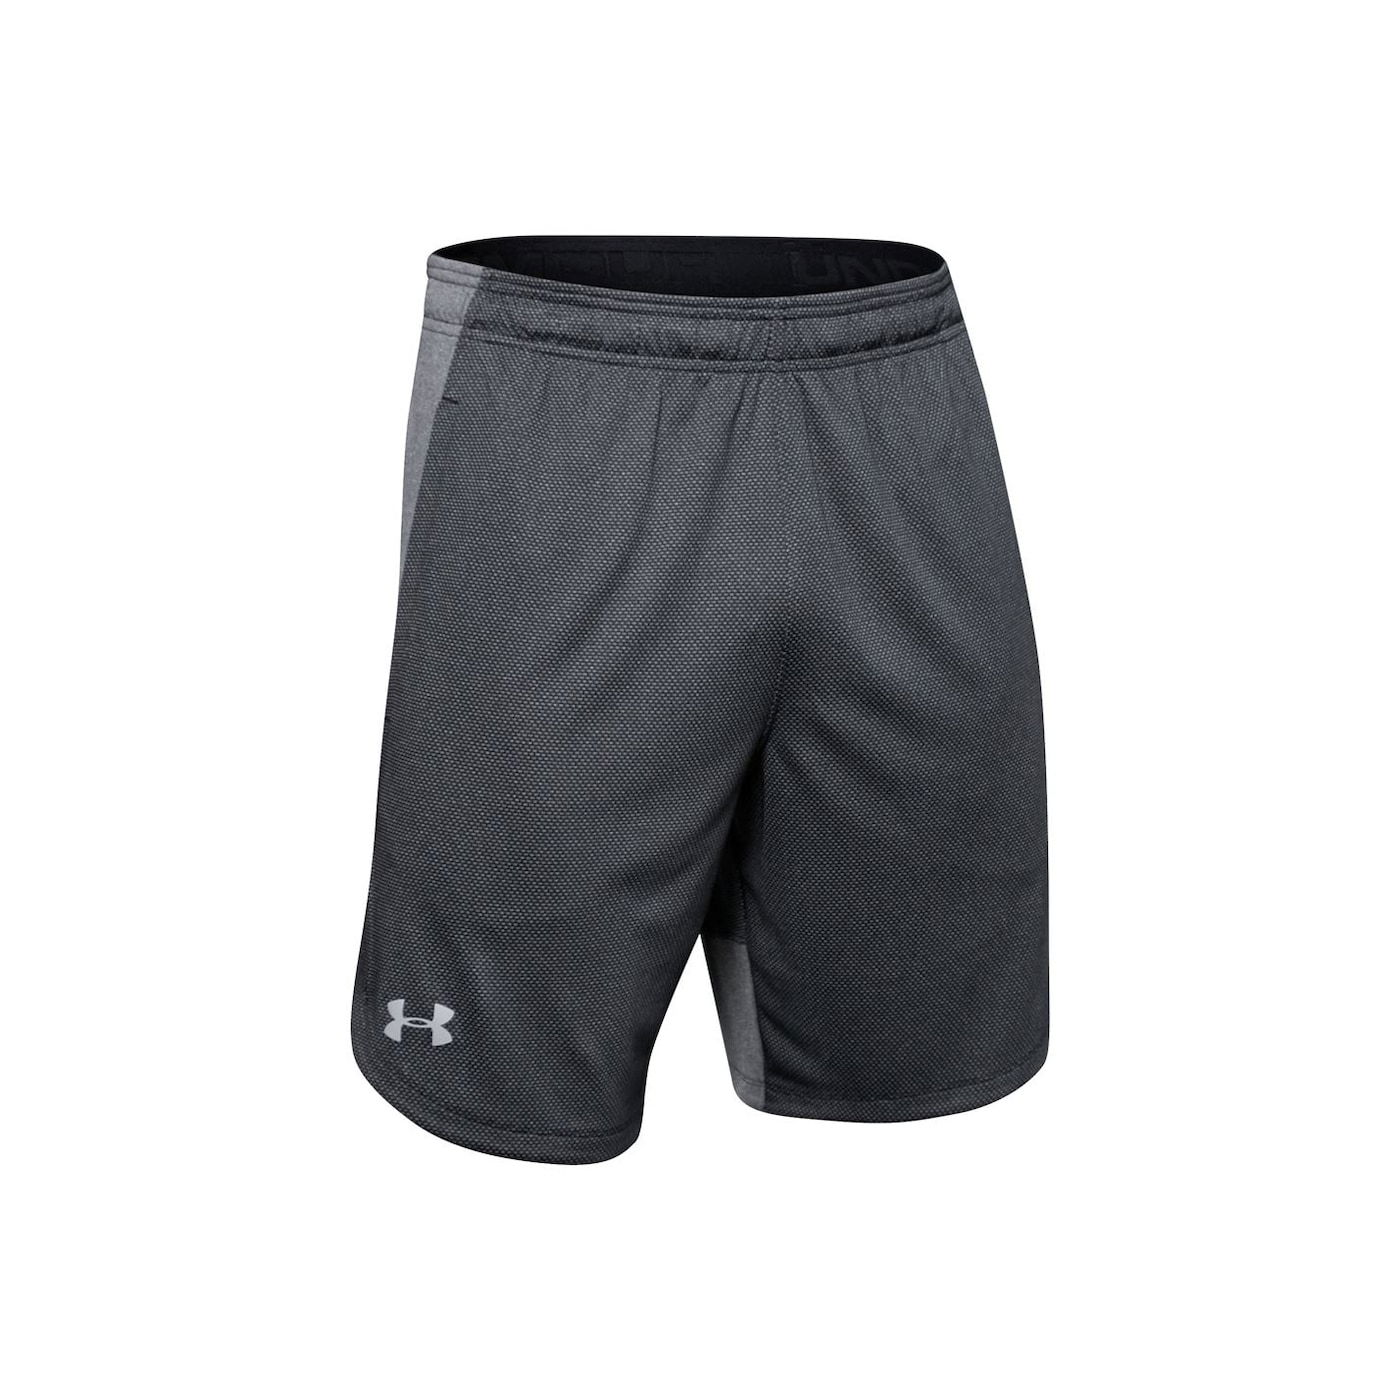 Under Armour Mens Knit Shorts